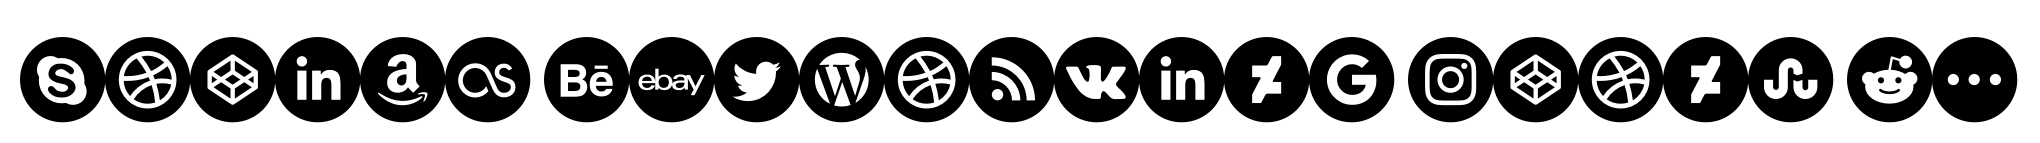 Social Networking Icons Rounded image